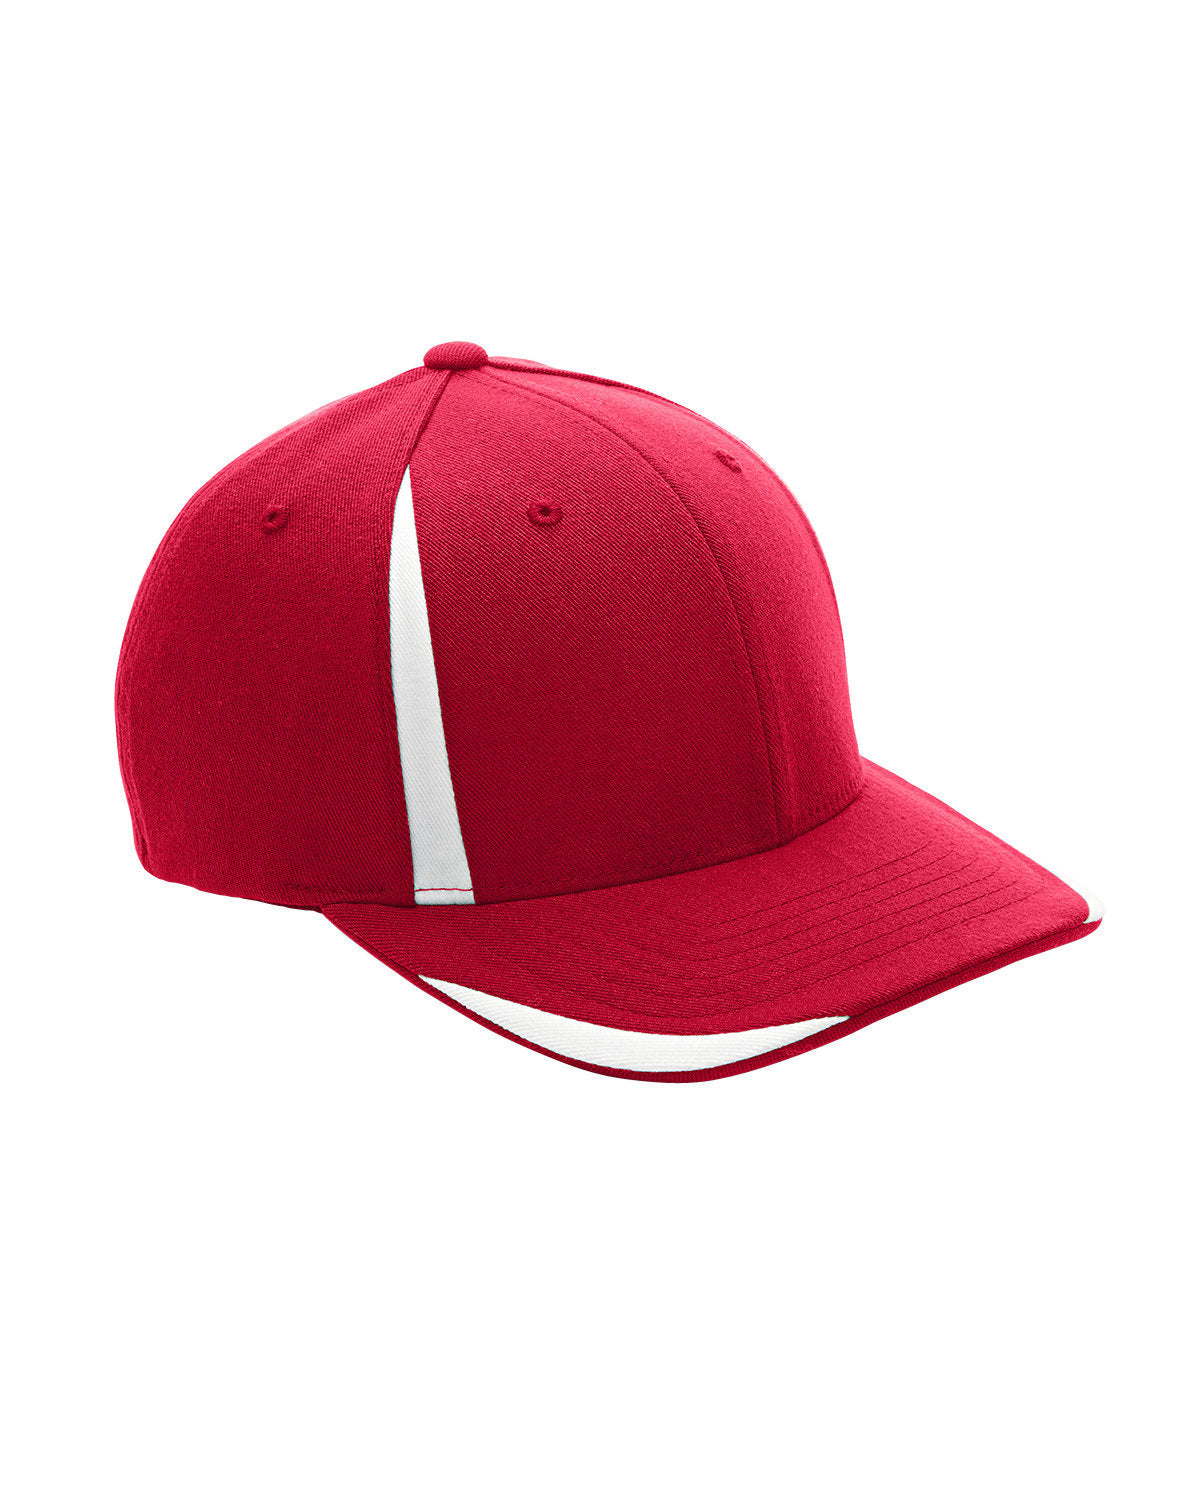 ATB102-T3-30-SPORTRED_WHITE-S_M